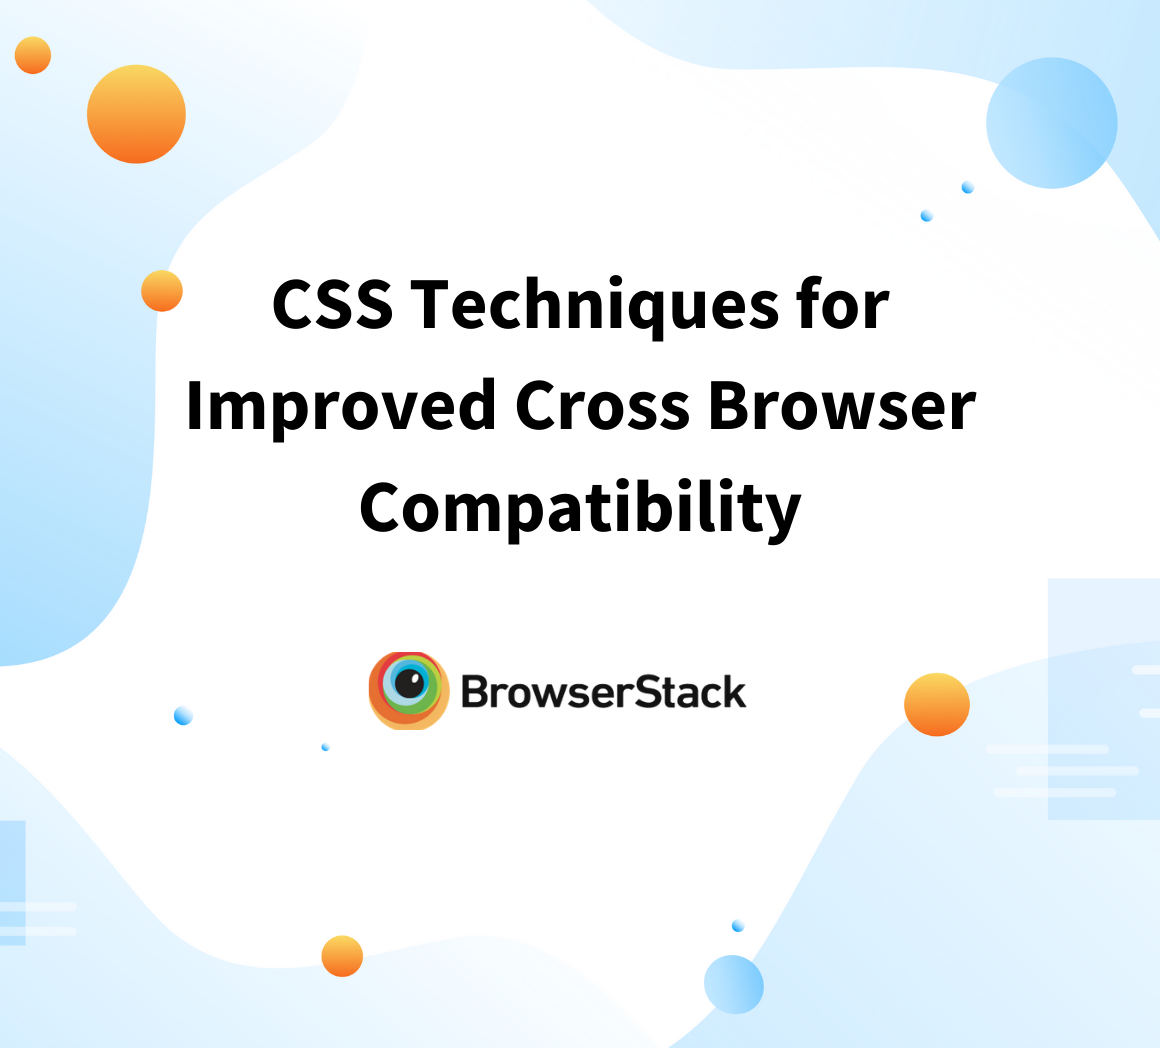 CSS techniques for Improved Cross Browser Compatibility